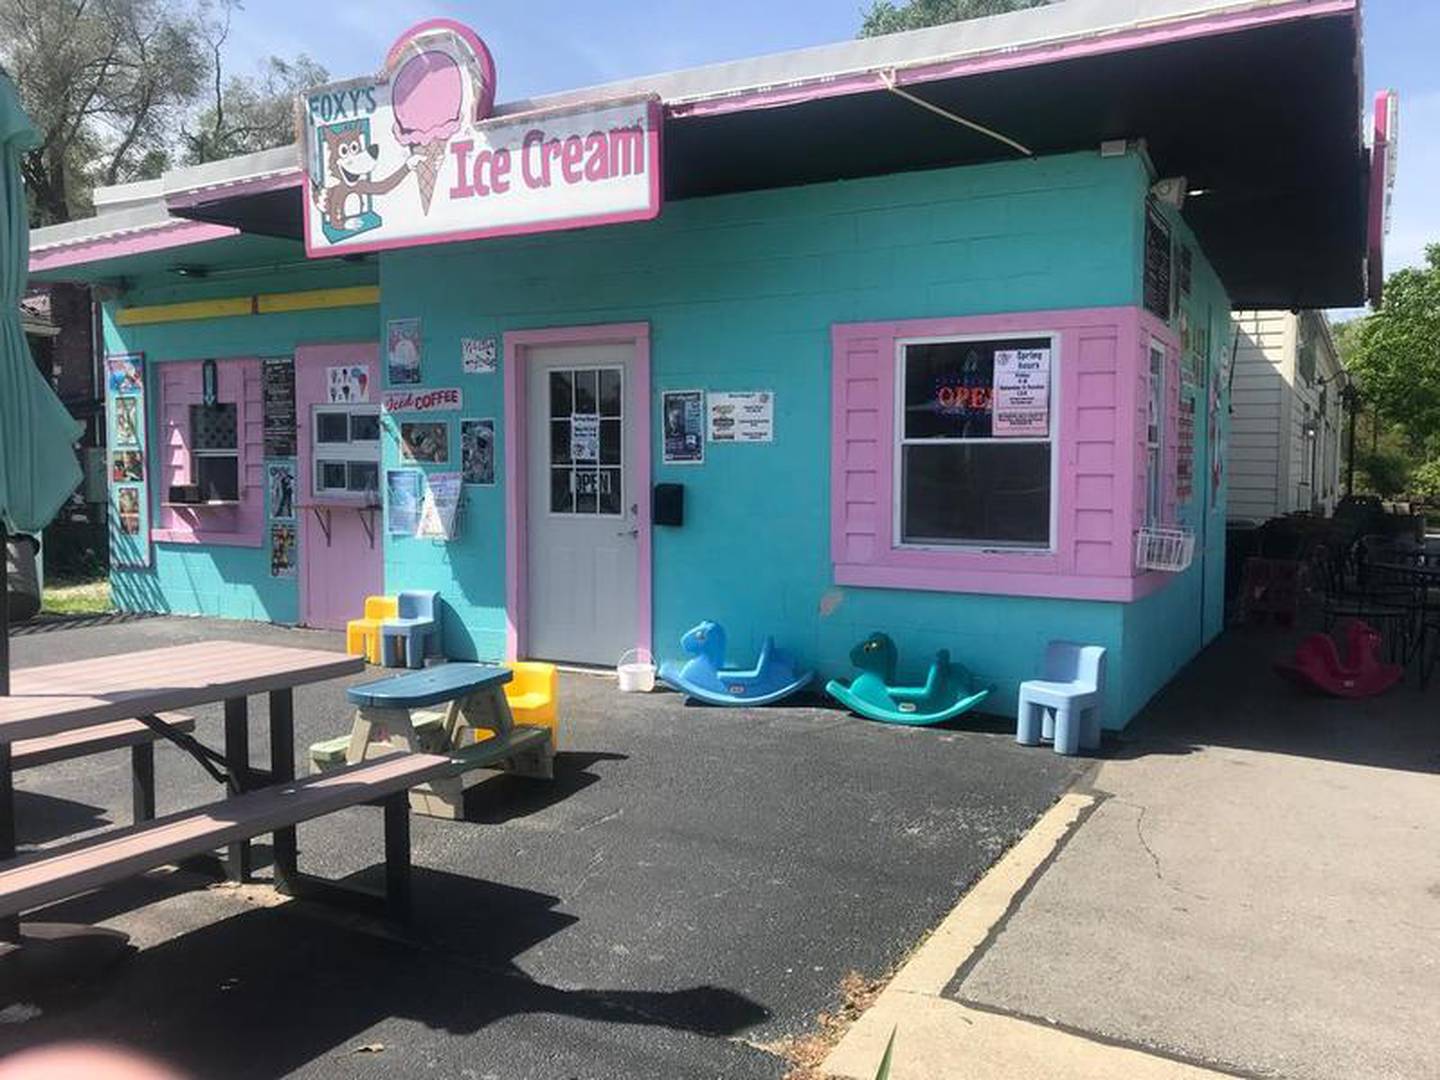 The bright blue and pink colors of Foxy's Ice Cream draw customers from all over.